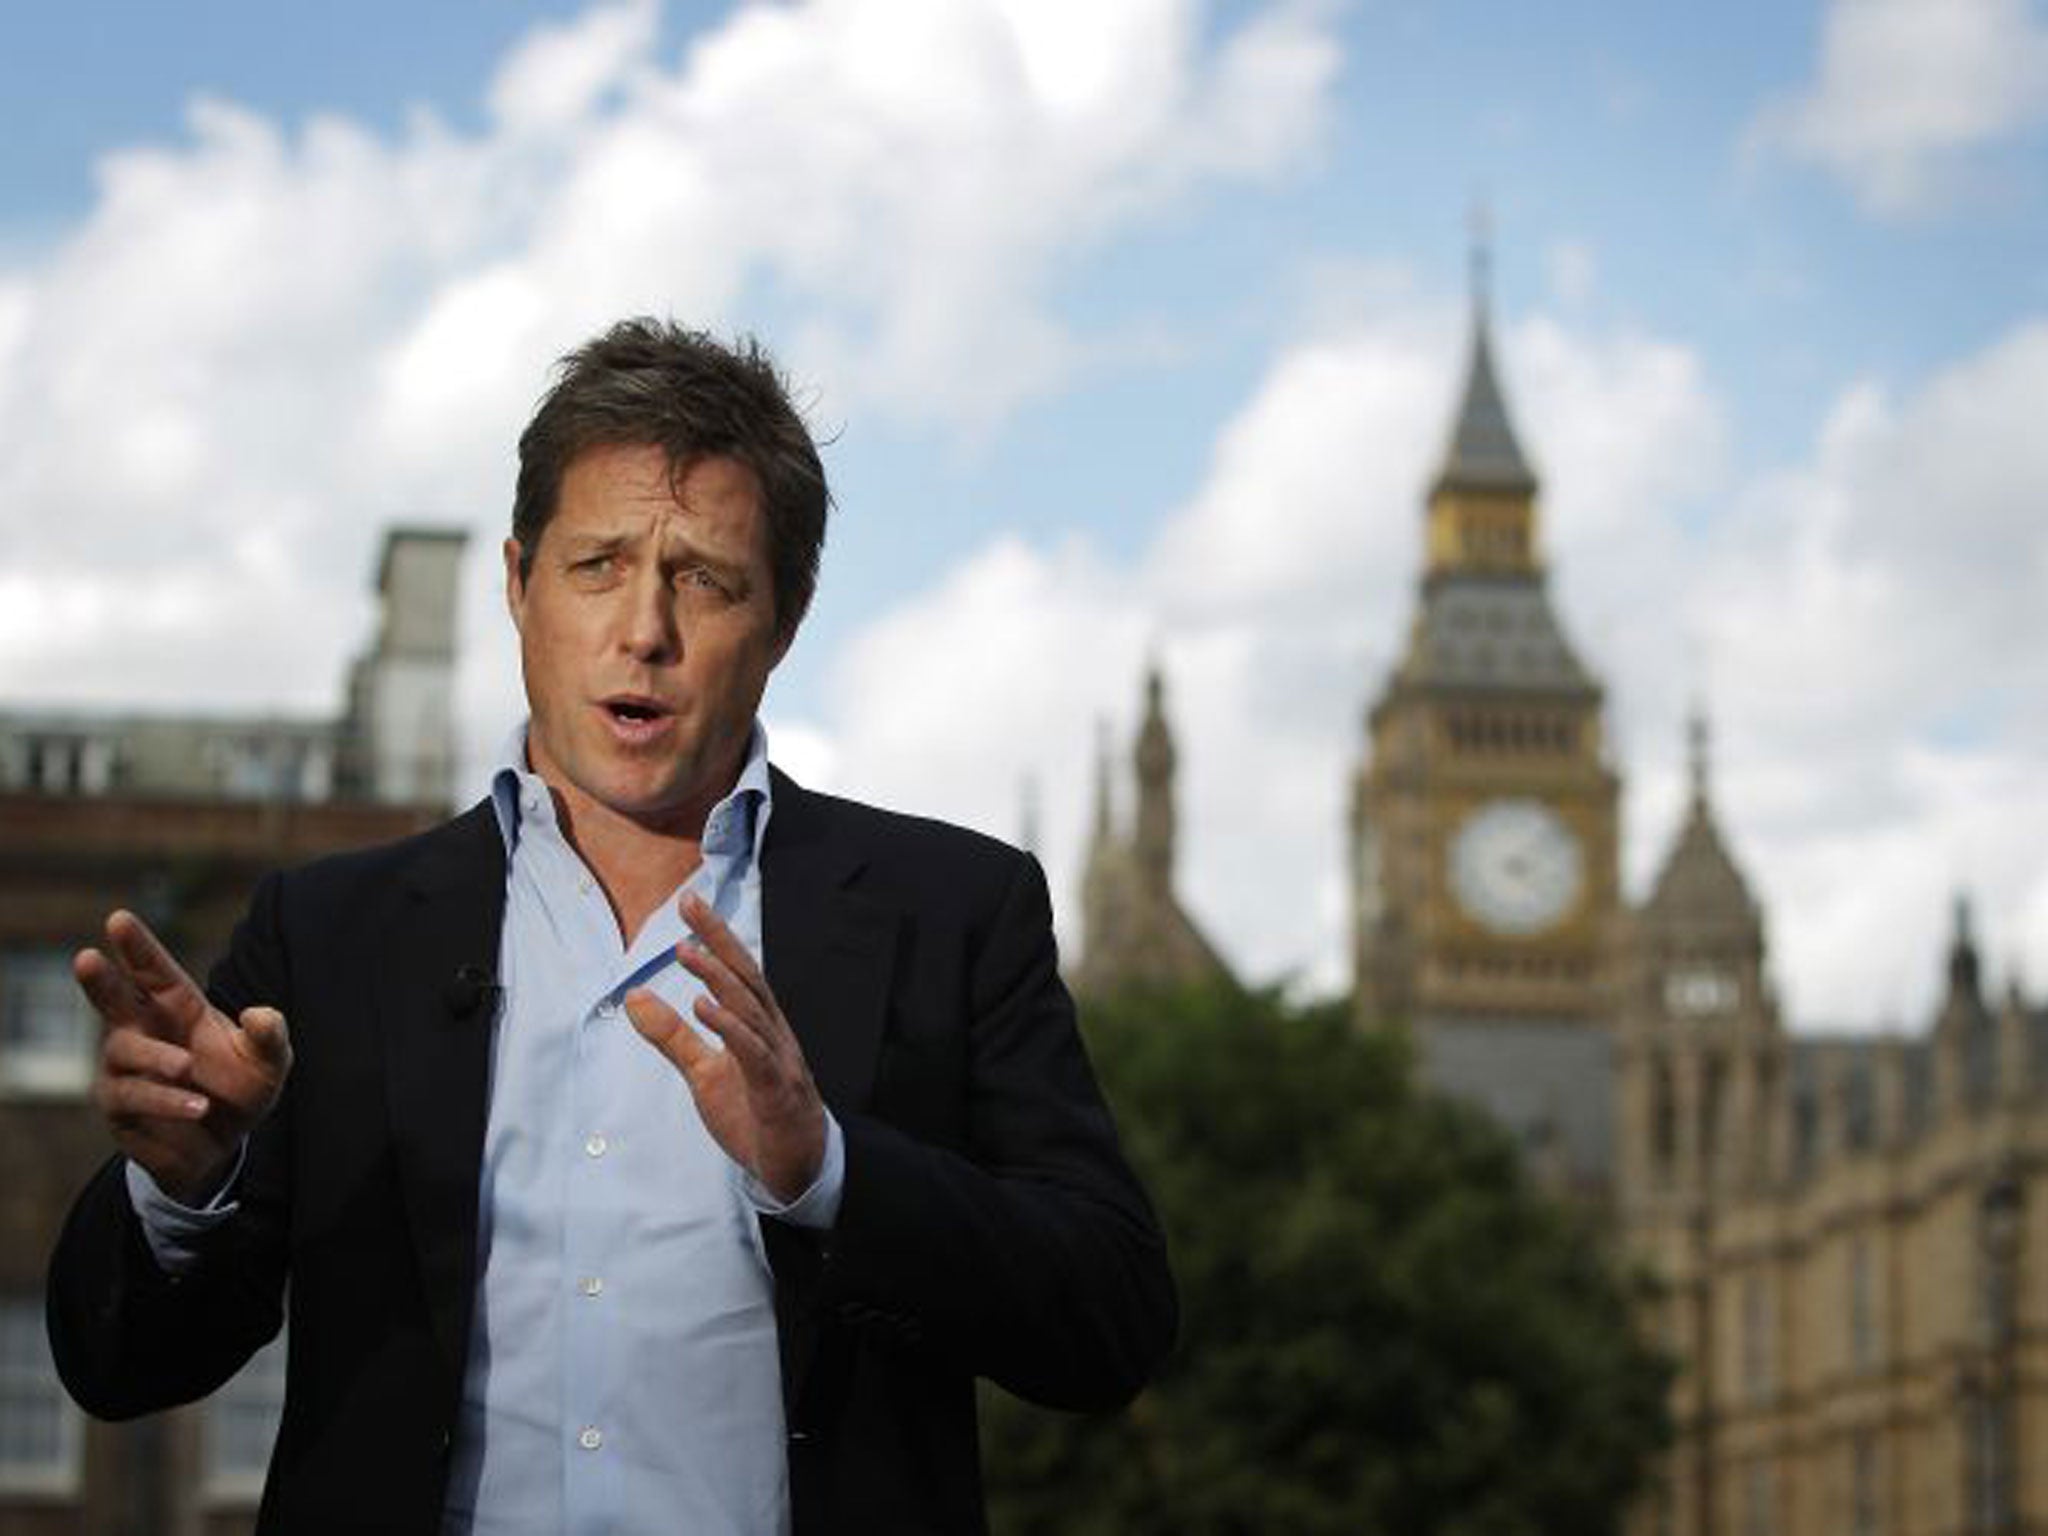 Hugh Grant said he would donate the damages to the Hacked Off campaign